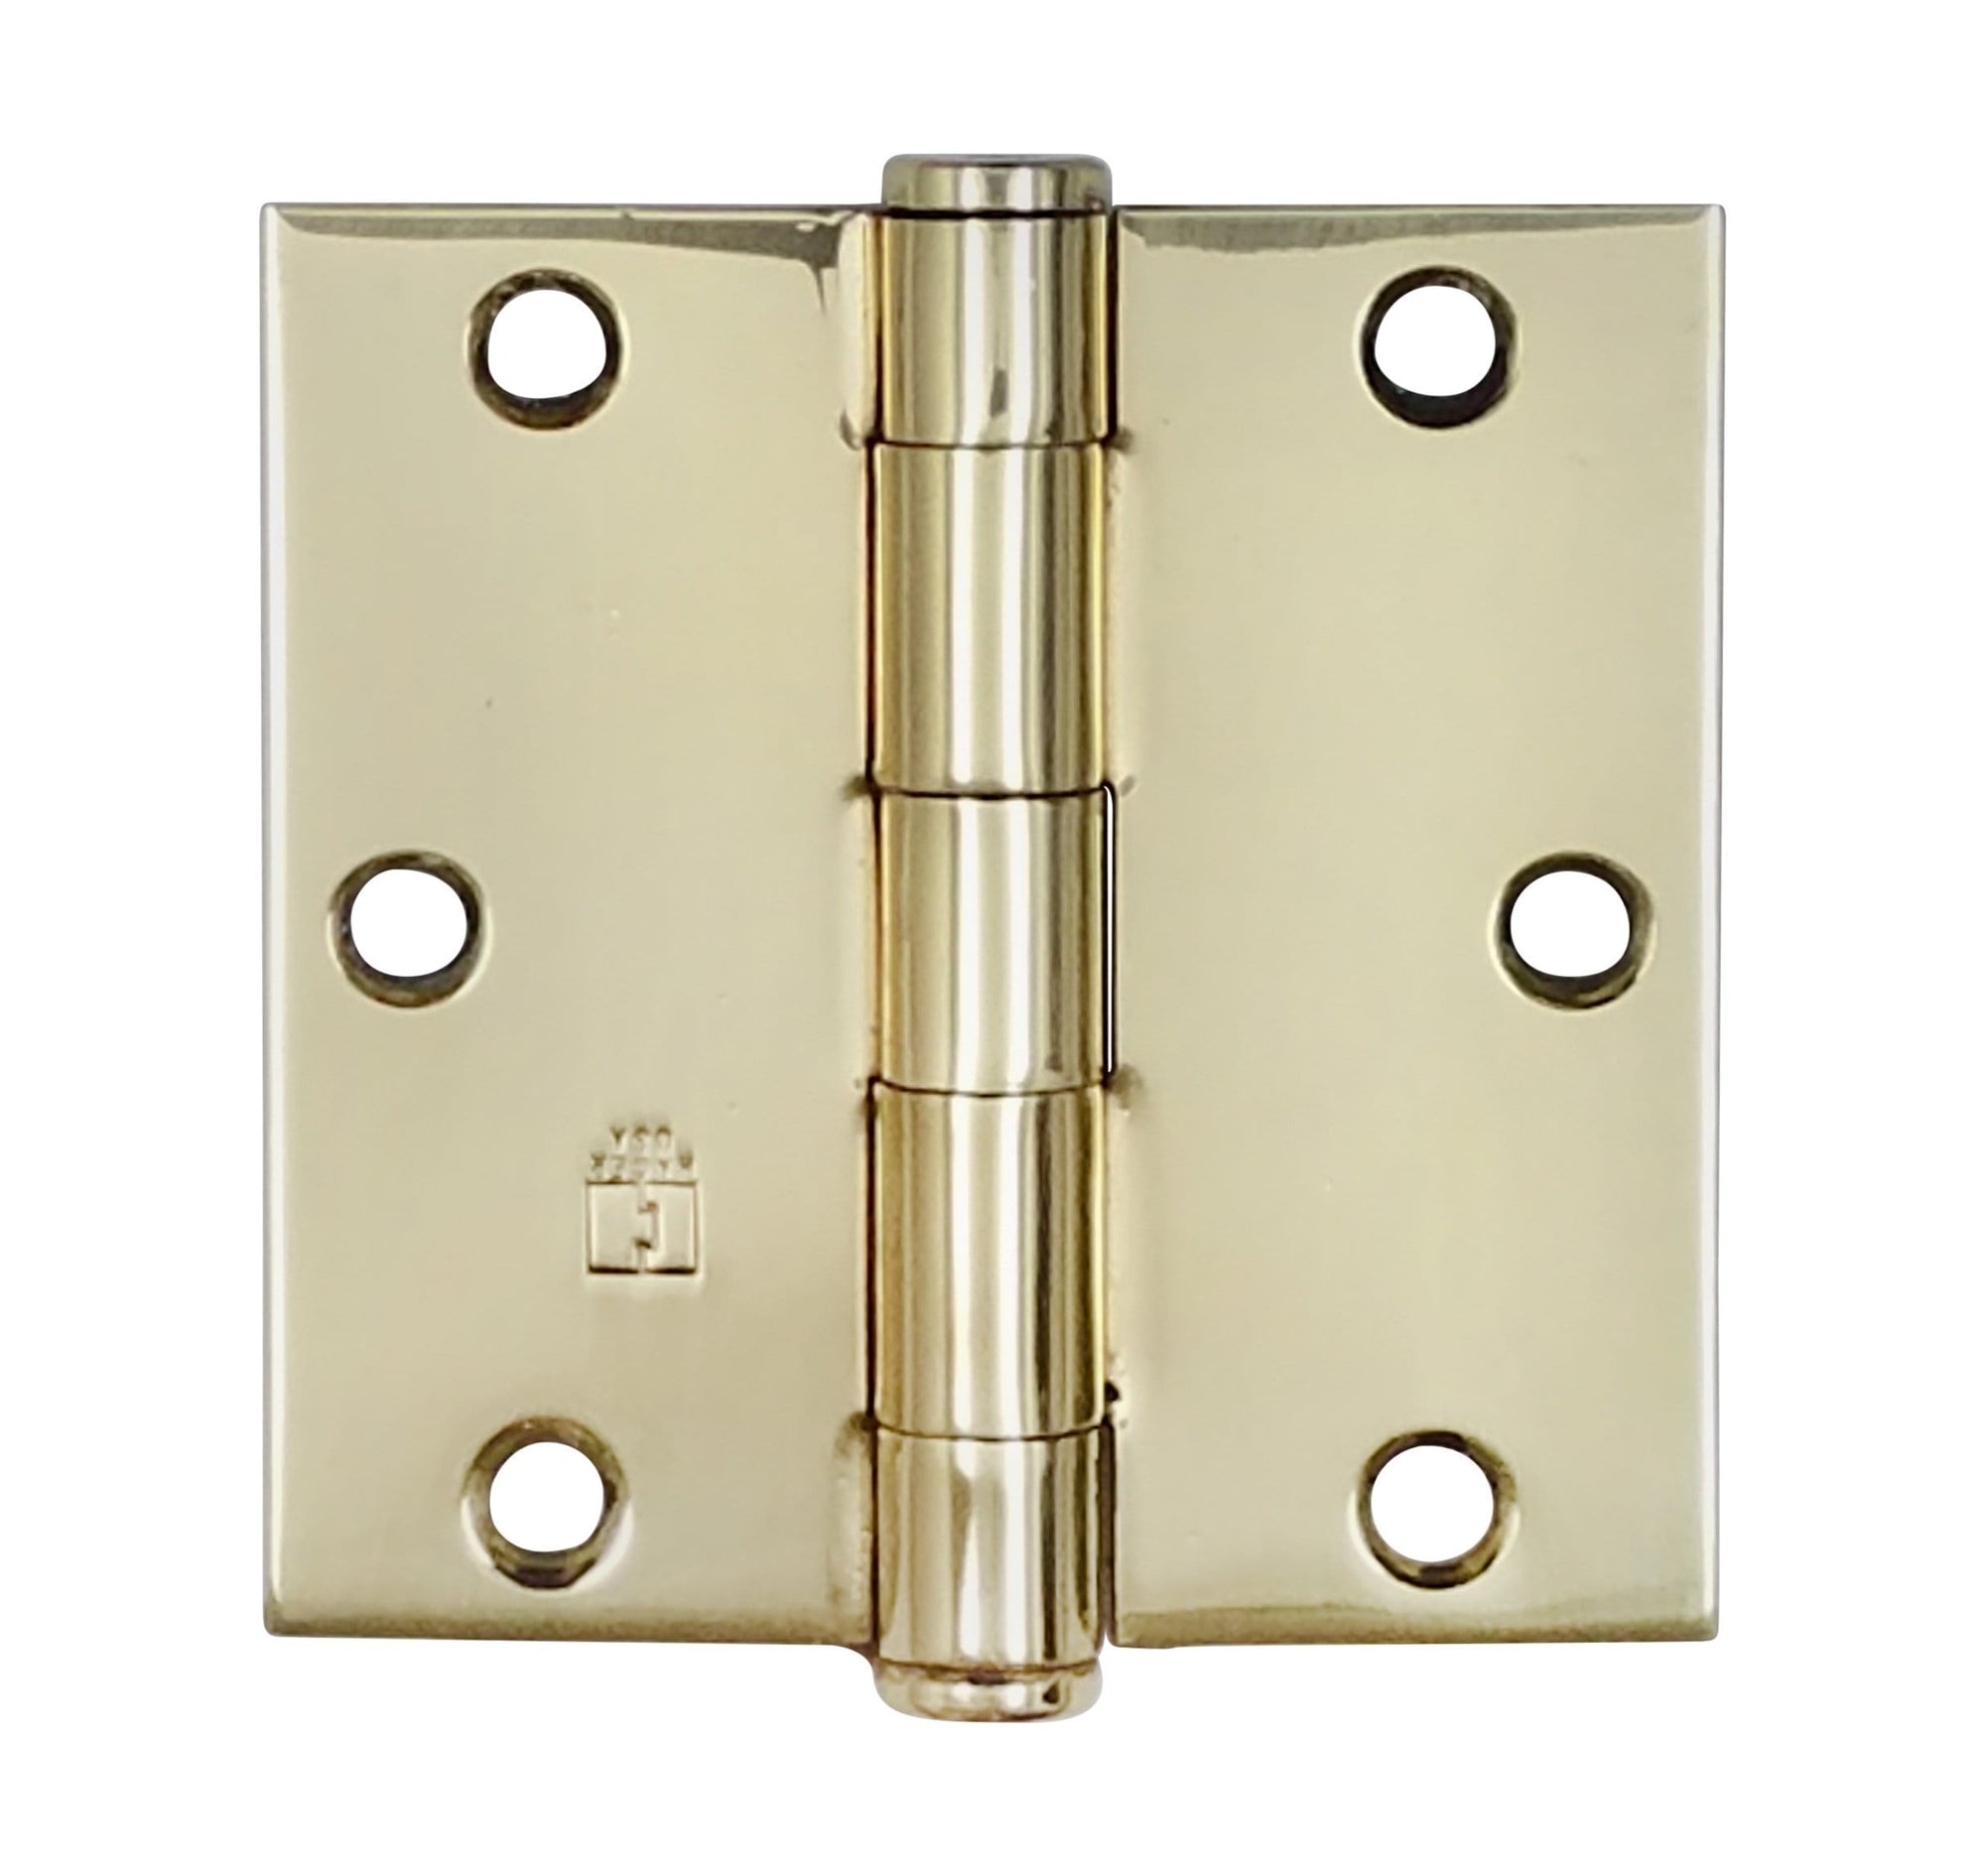 Hager Door Hinges - 3.5" Inch Square - Multiple Finishes - 3 Pack